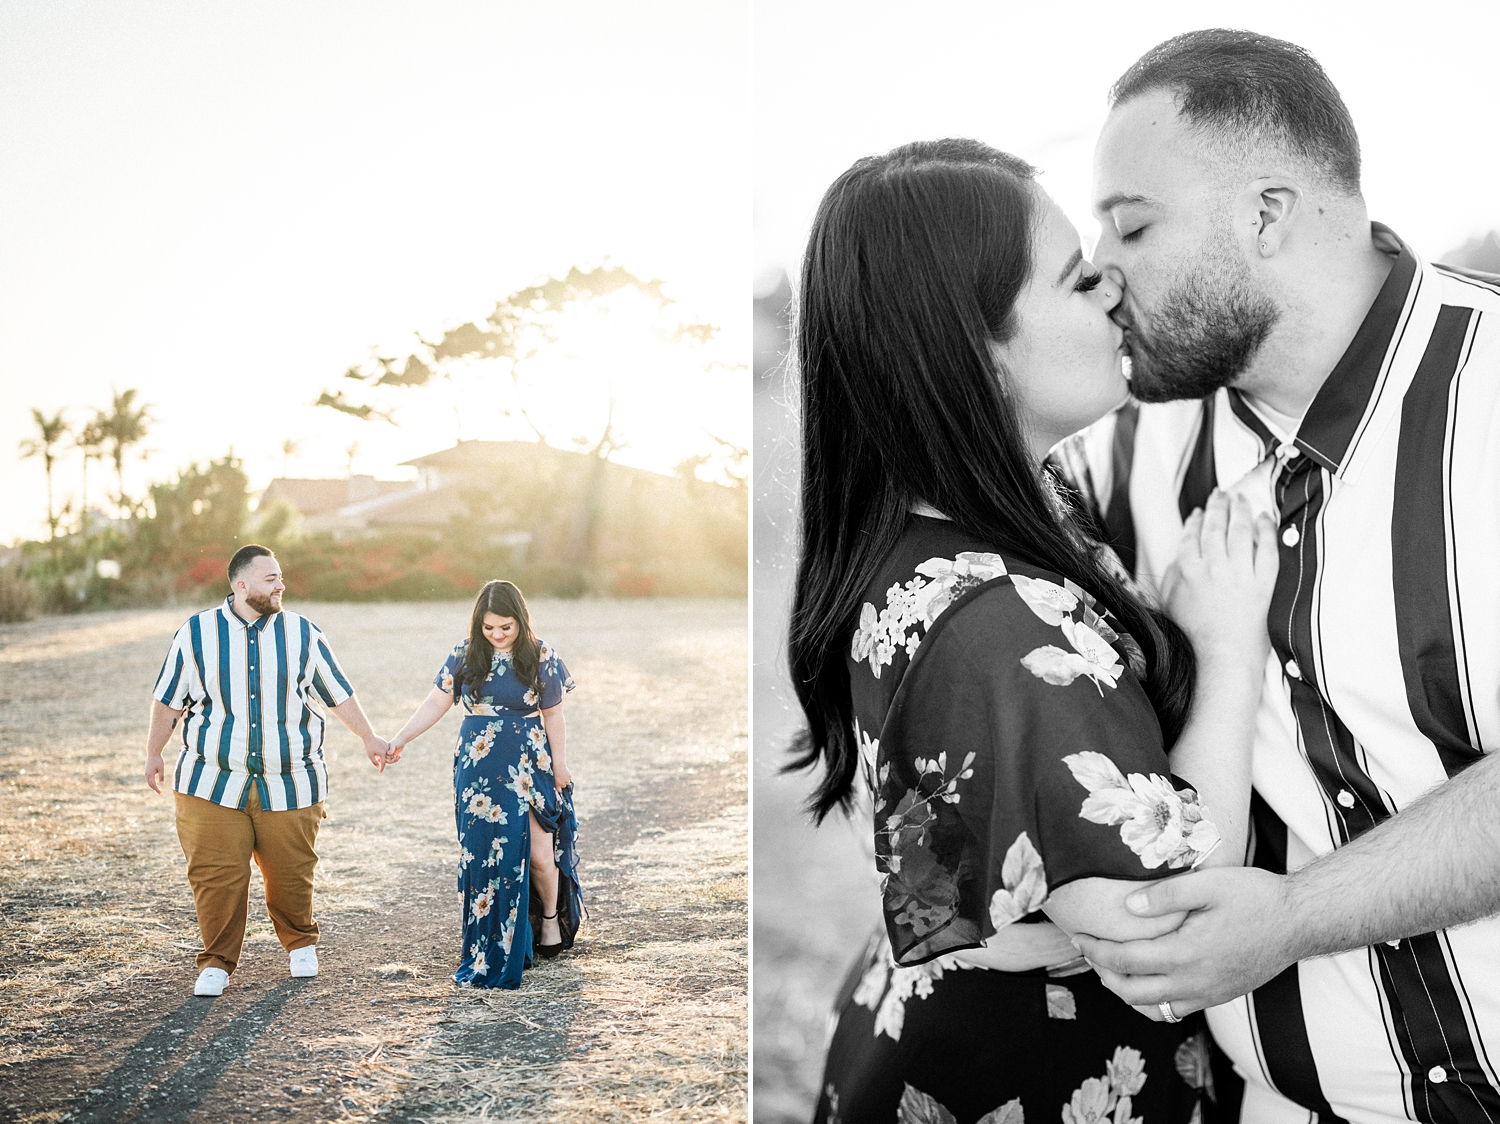 Beach Cliffs Engagement Session at Sunset | Nataly Hernandez Photography | Edwin and Susana-59.jpg